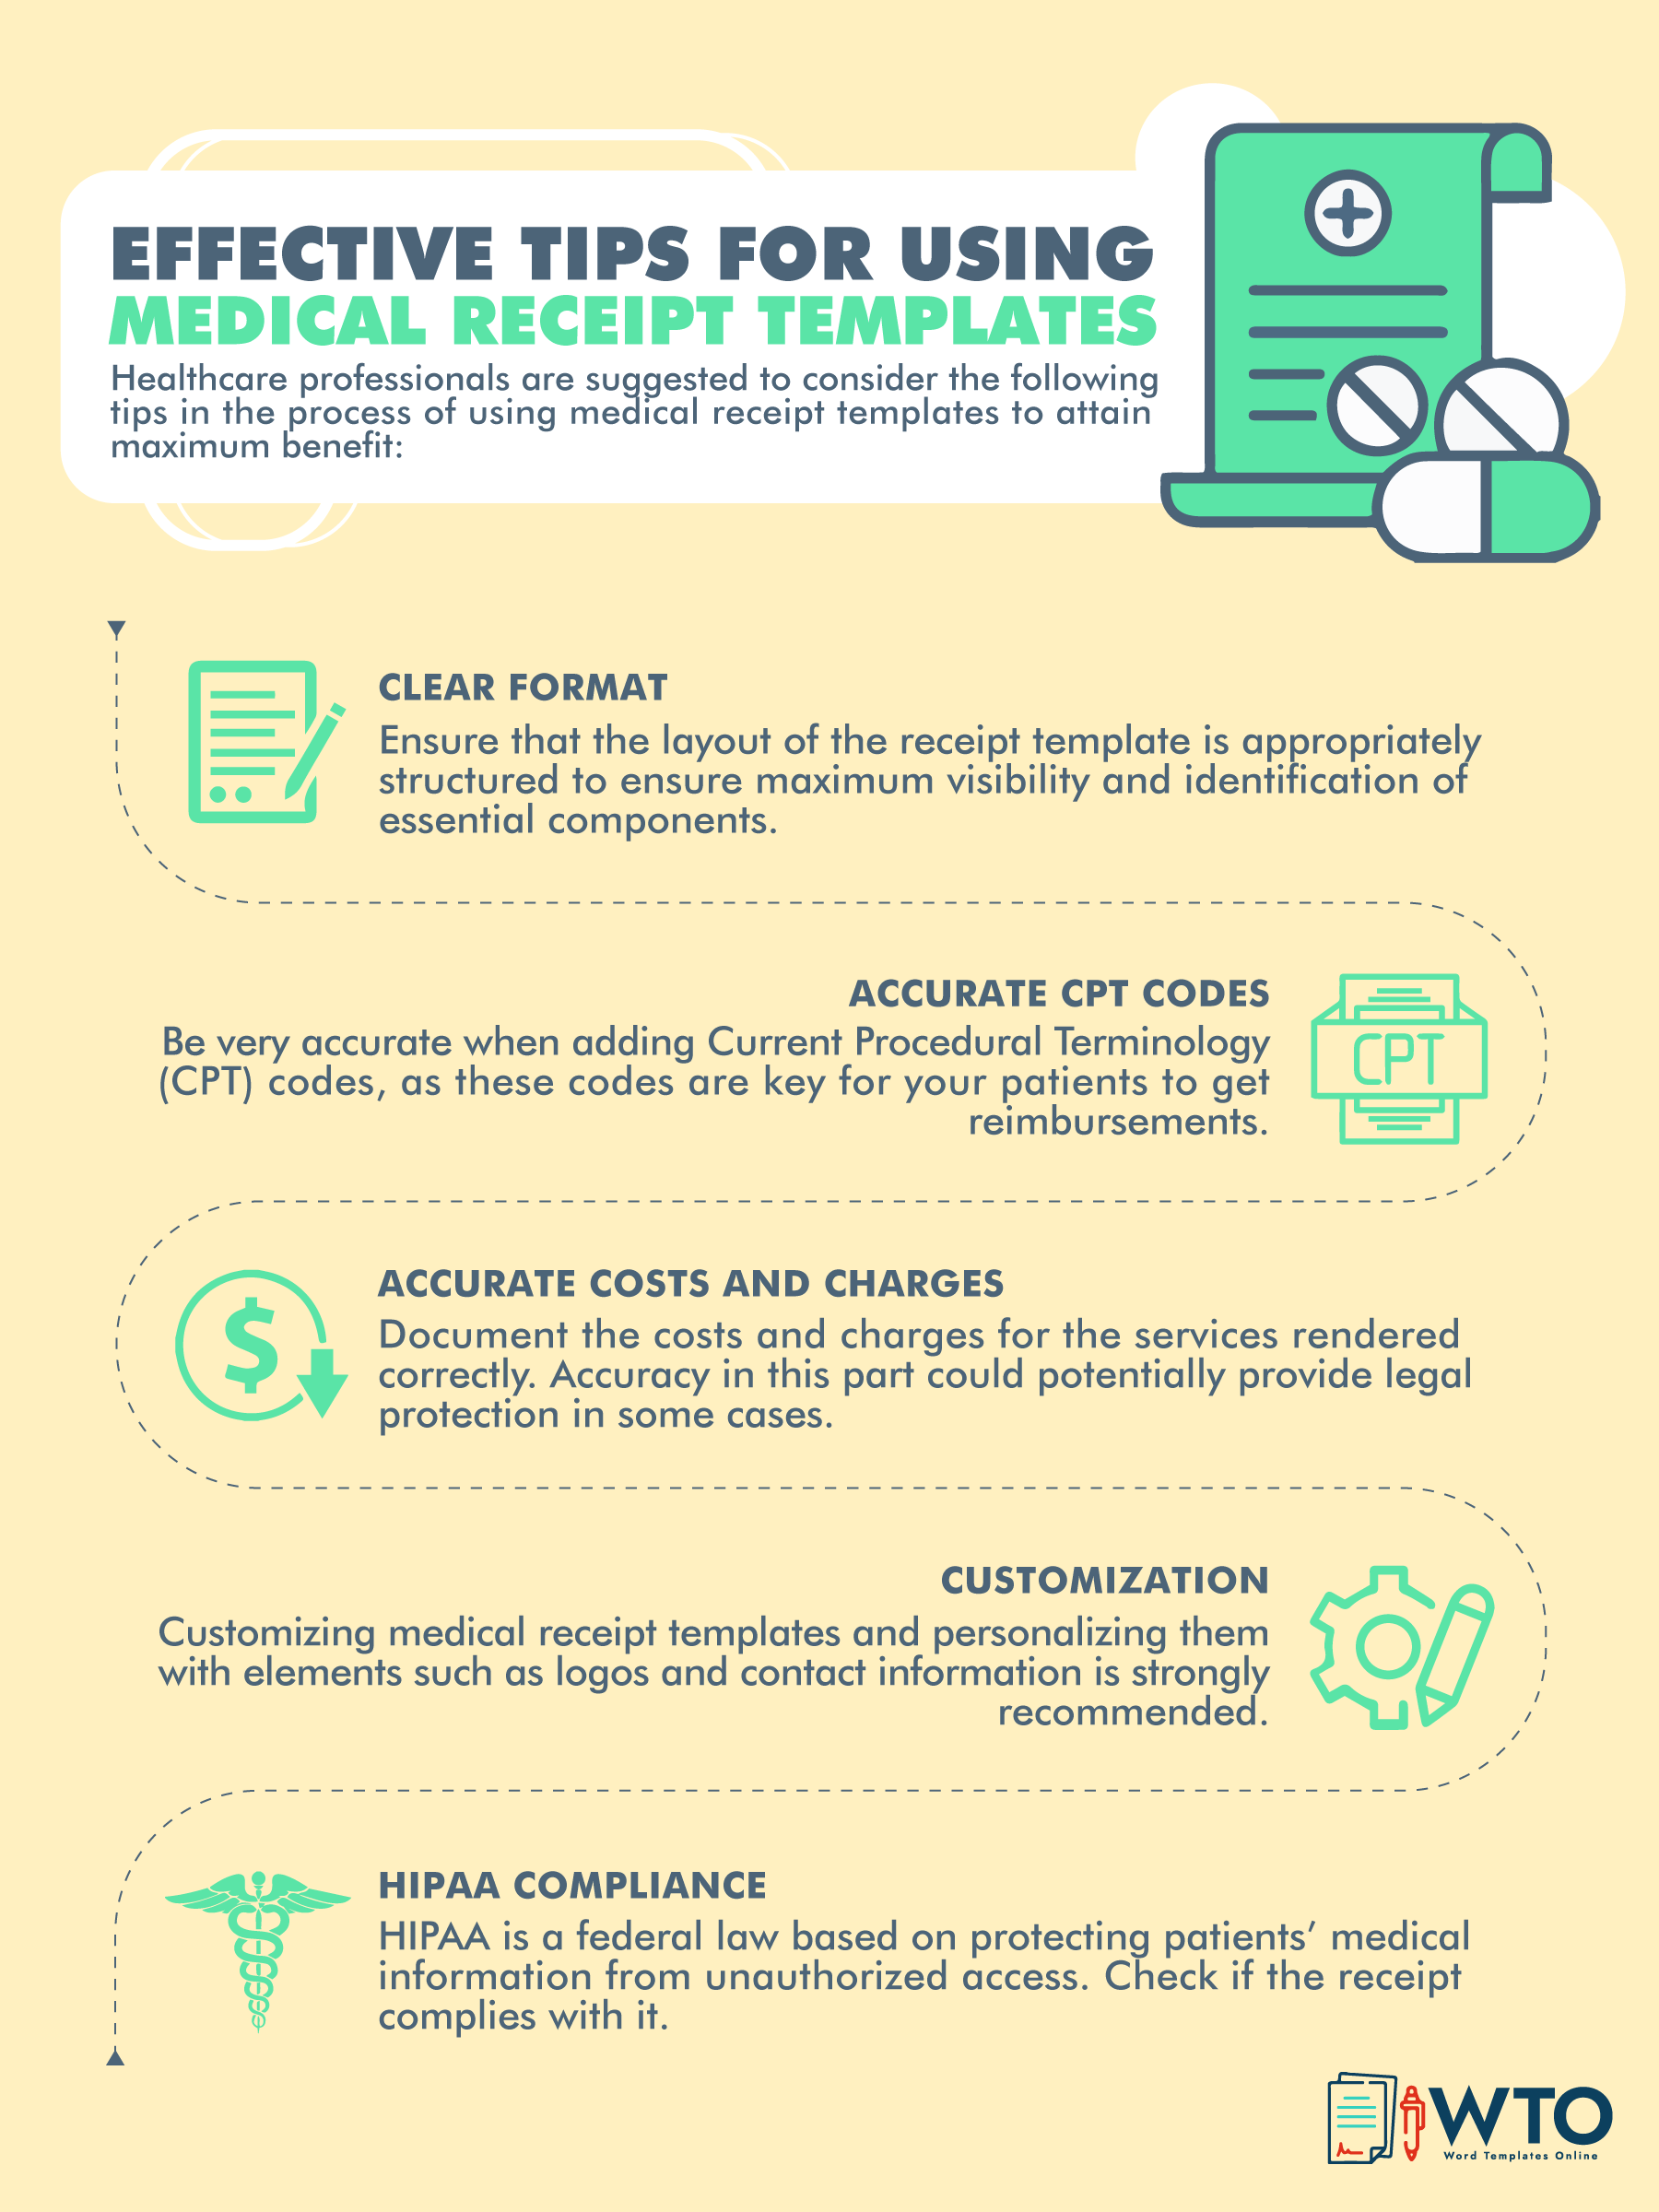 This infographic includes tips to use medical receipt templates.